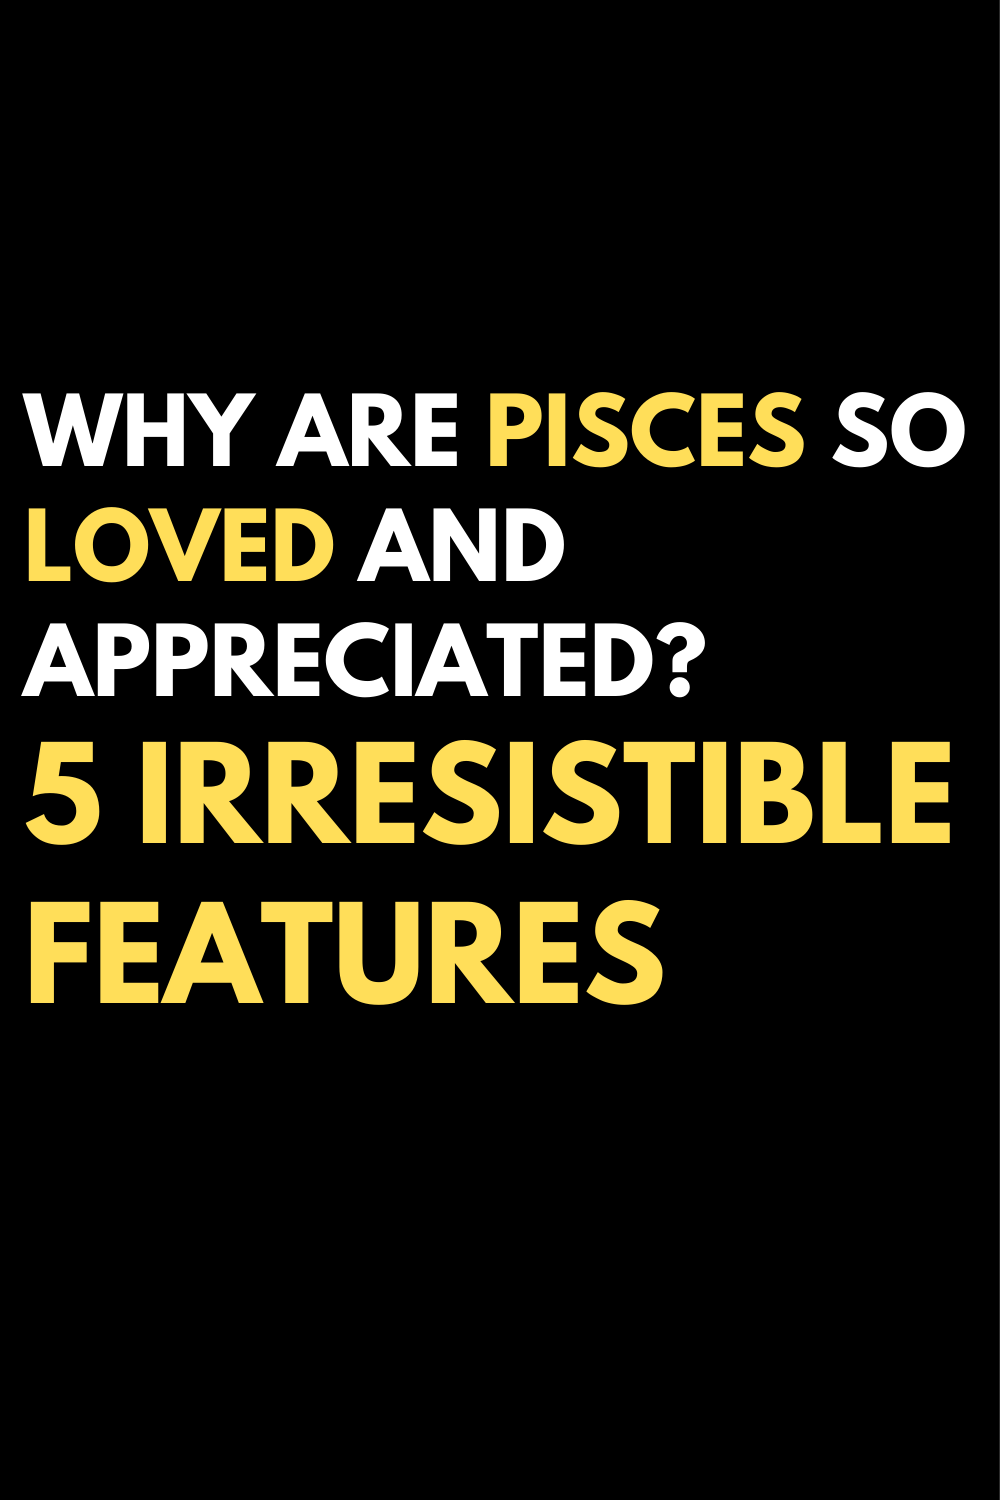 Why are Pisces so loved and appreciated? 5 irresistible features